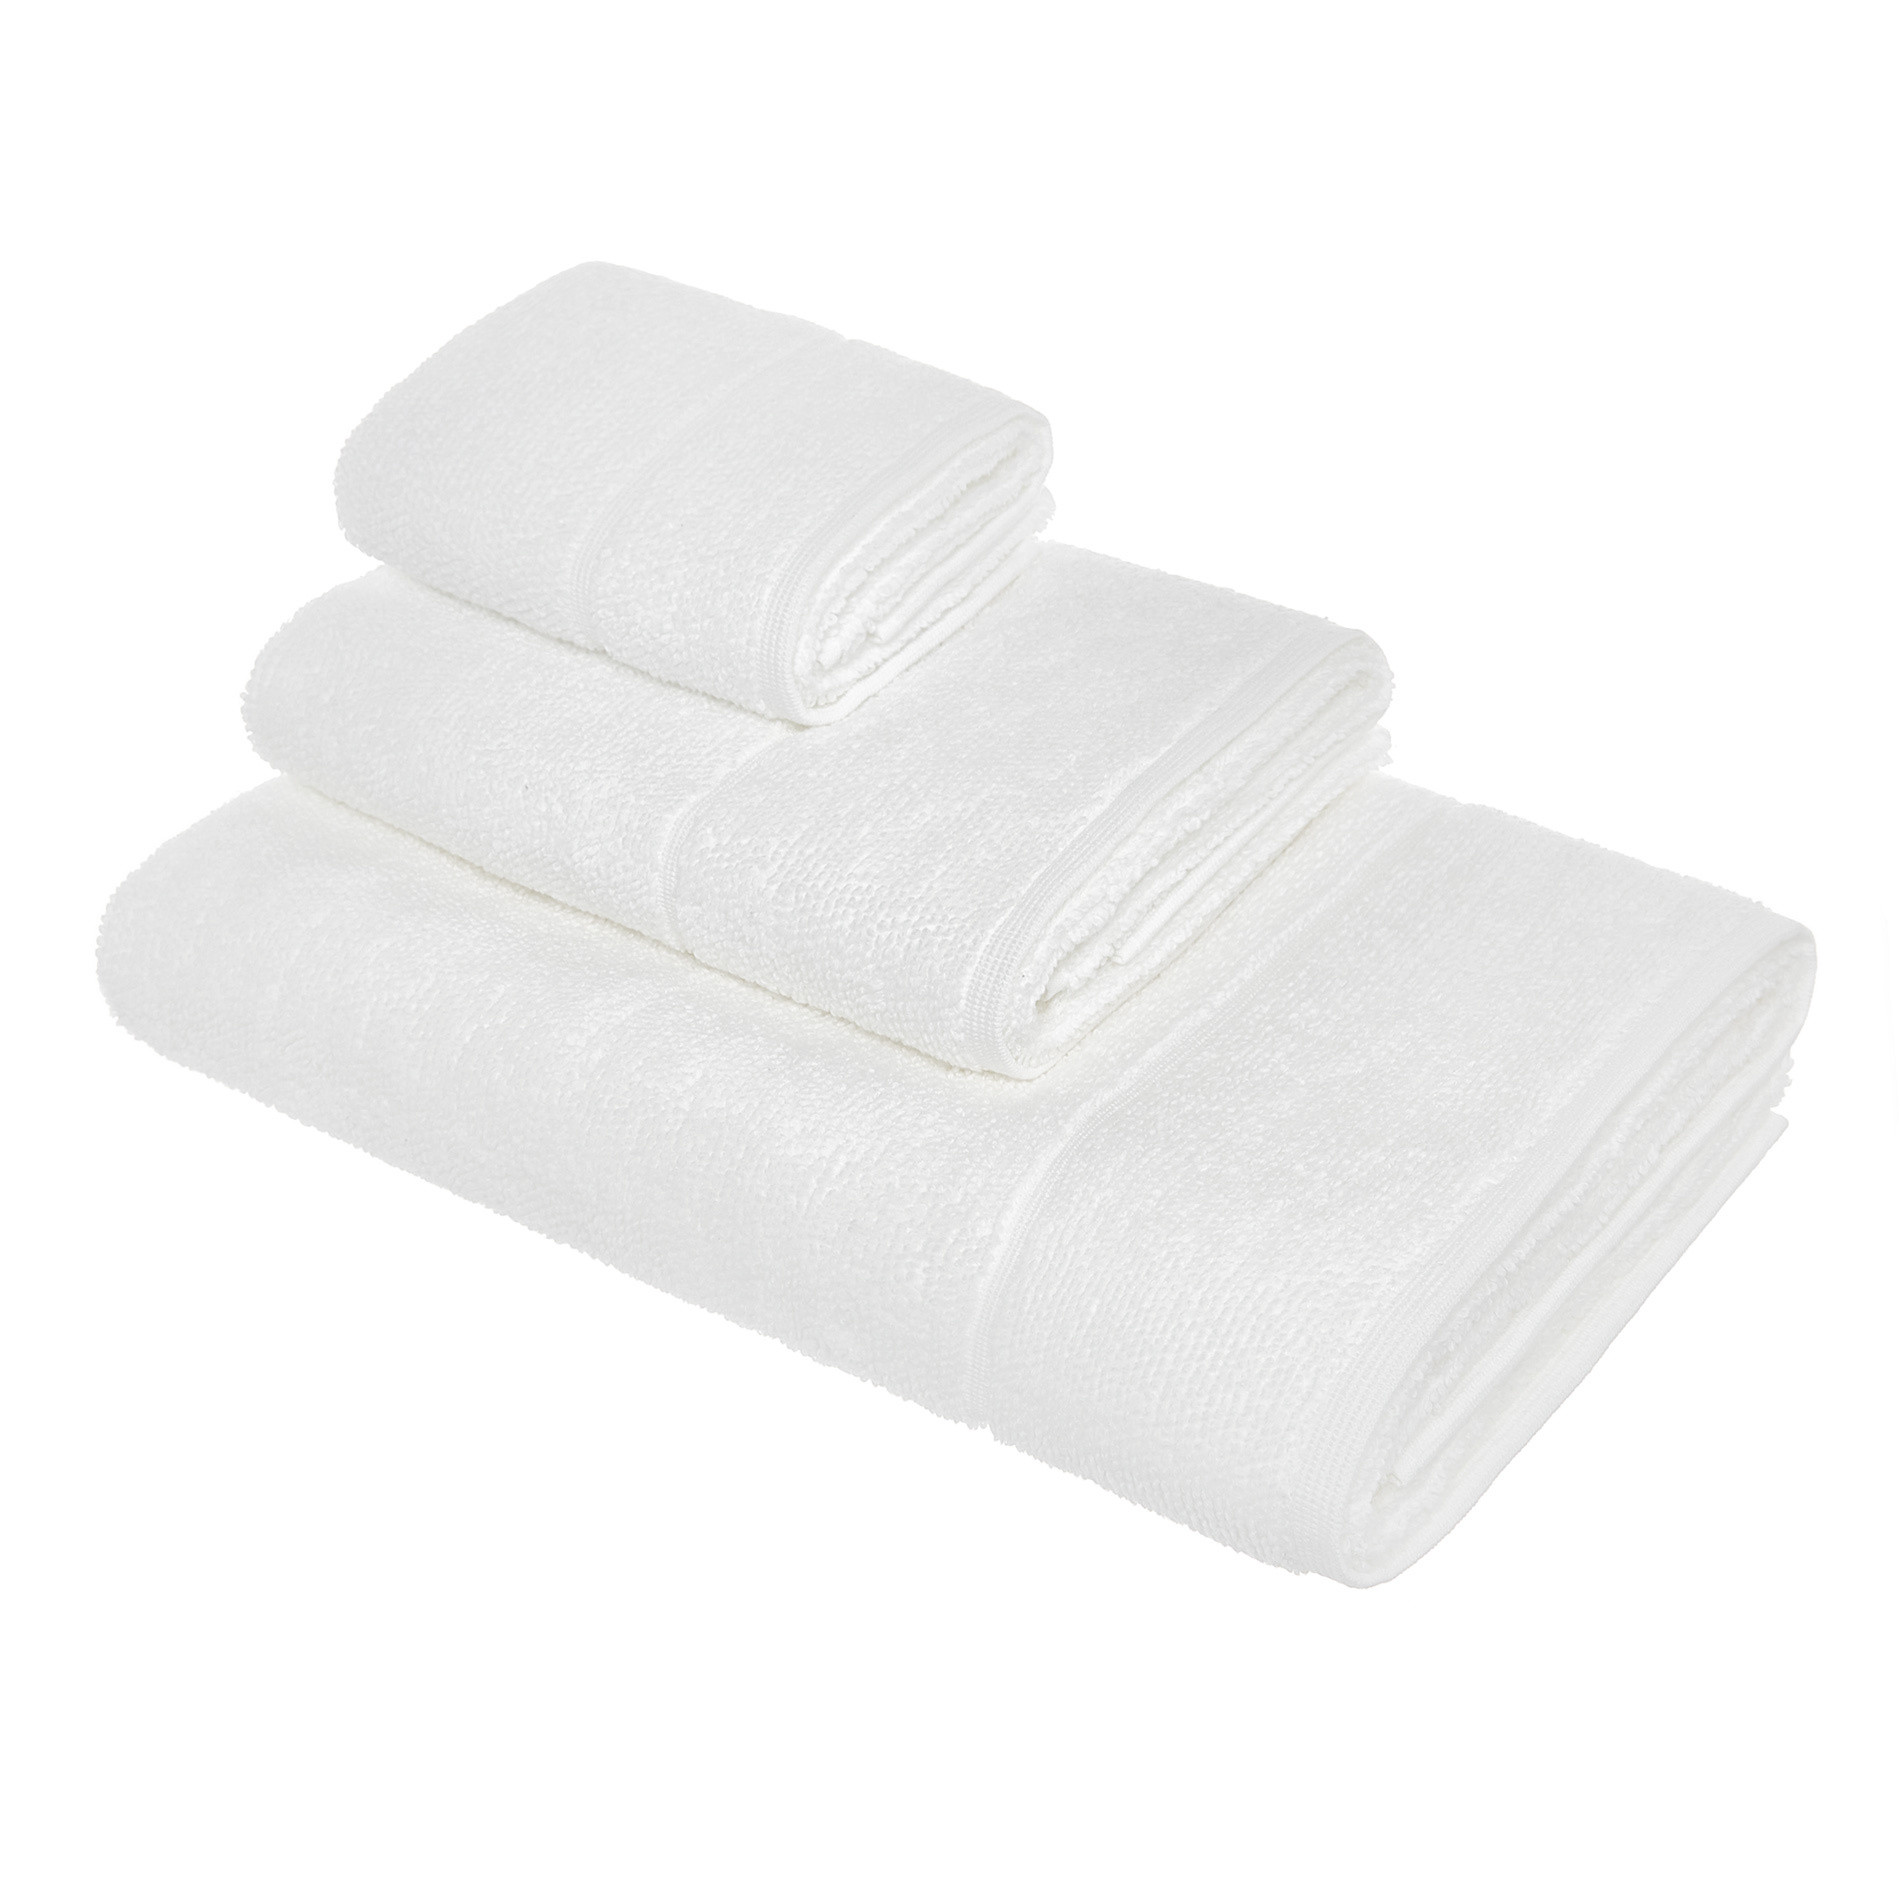 Thermae solid colour 100% cotton towel, White, large image number 0